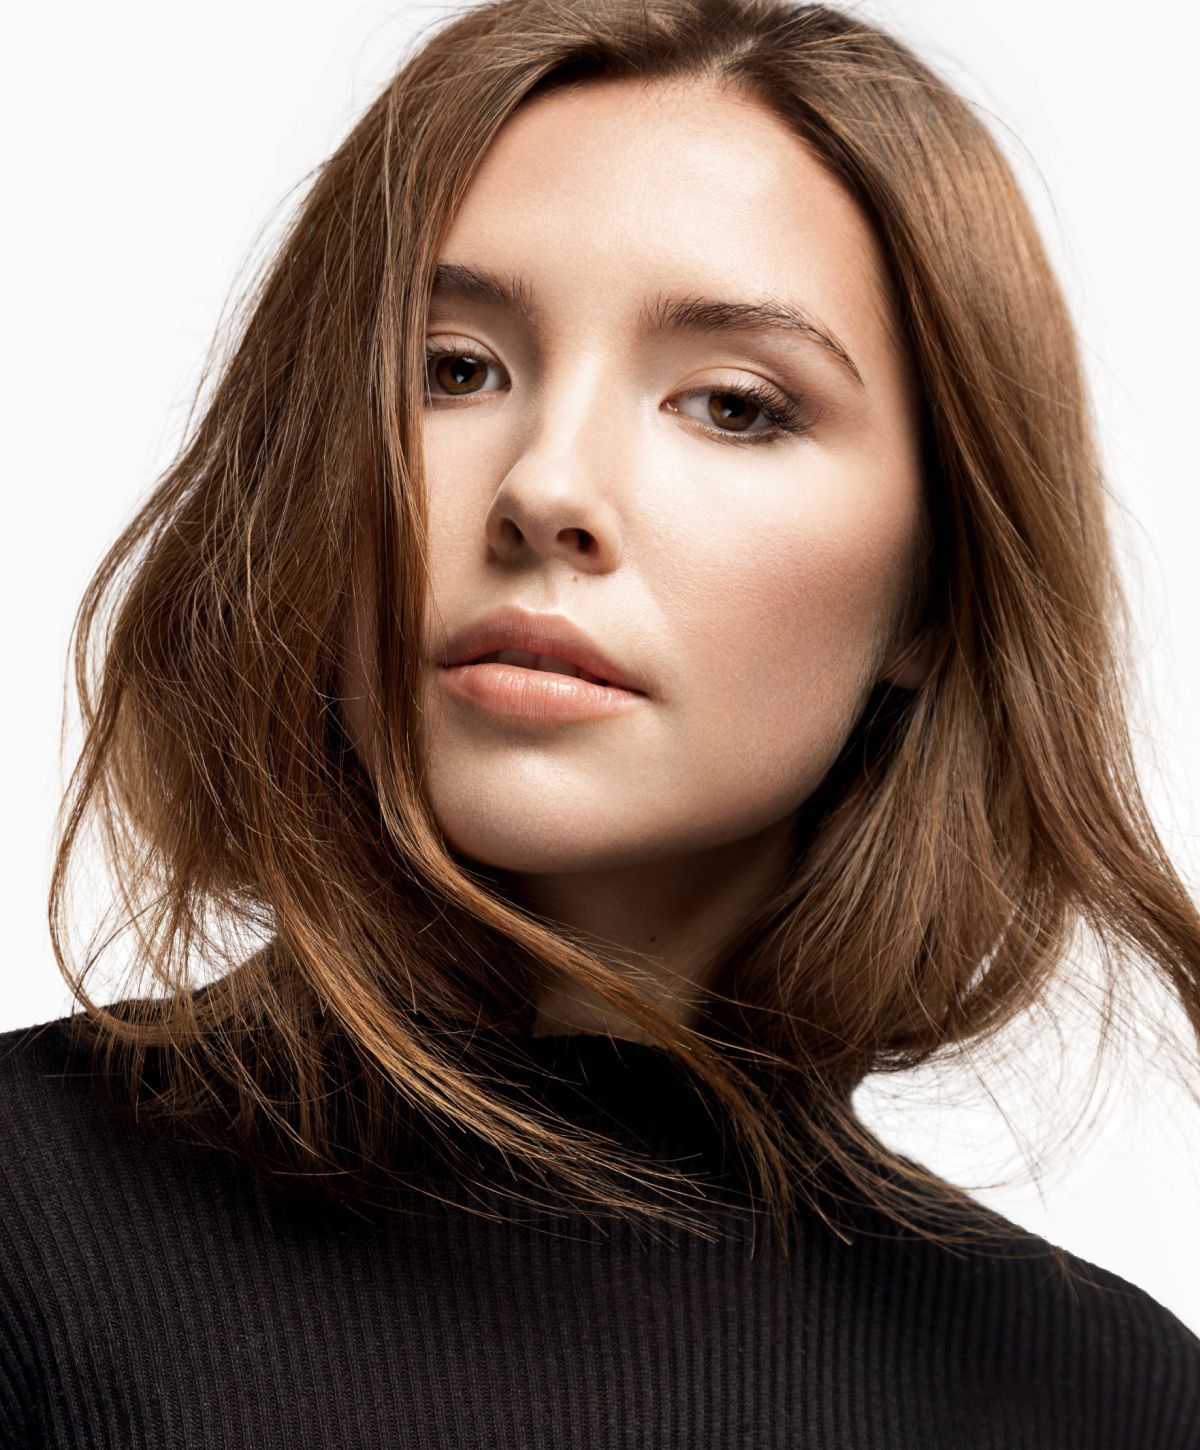 Franklin Kybella model with brown hair